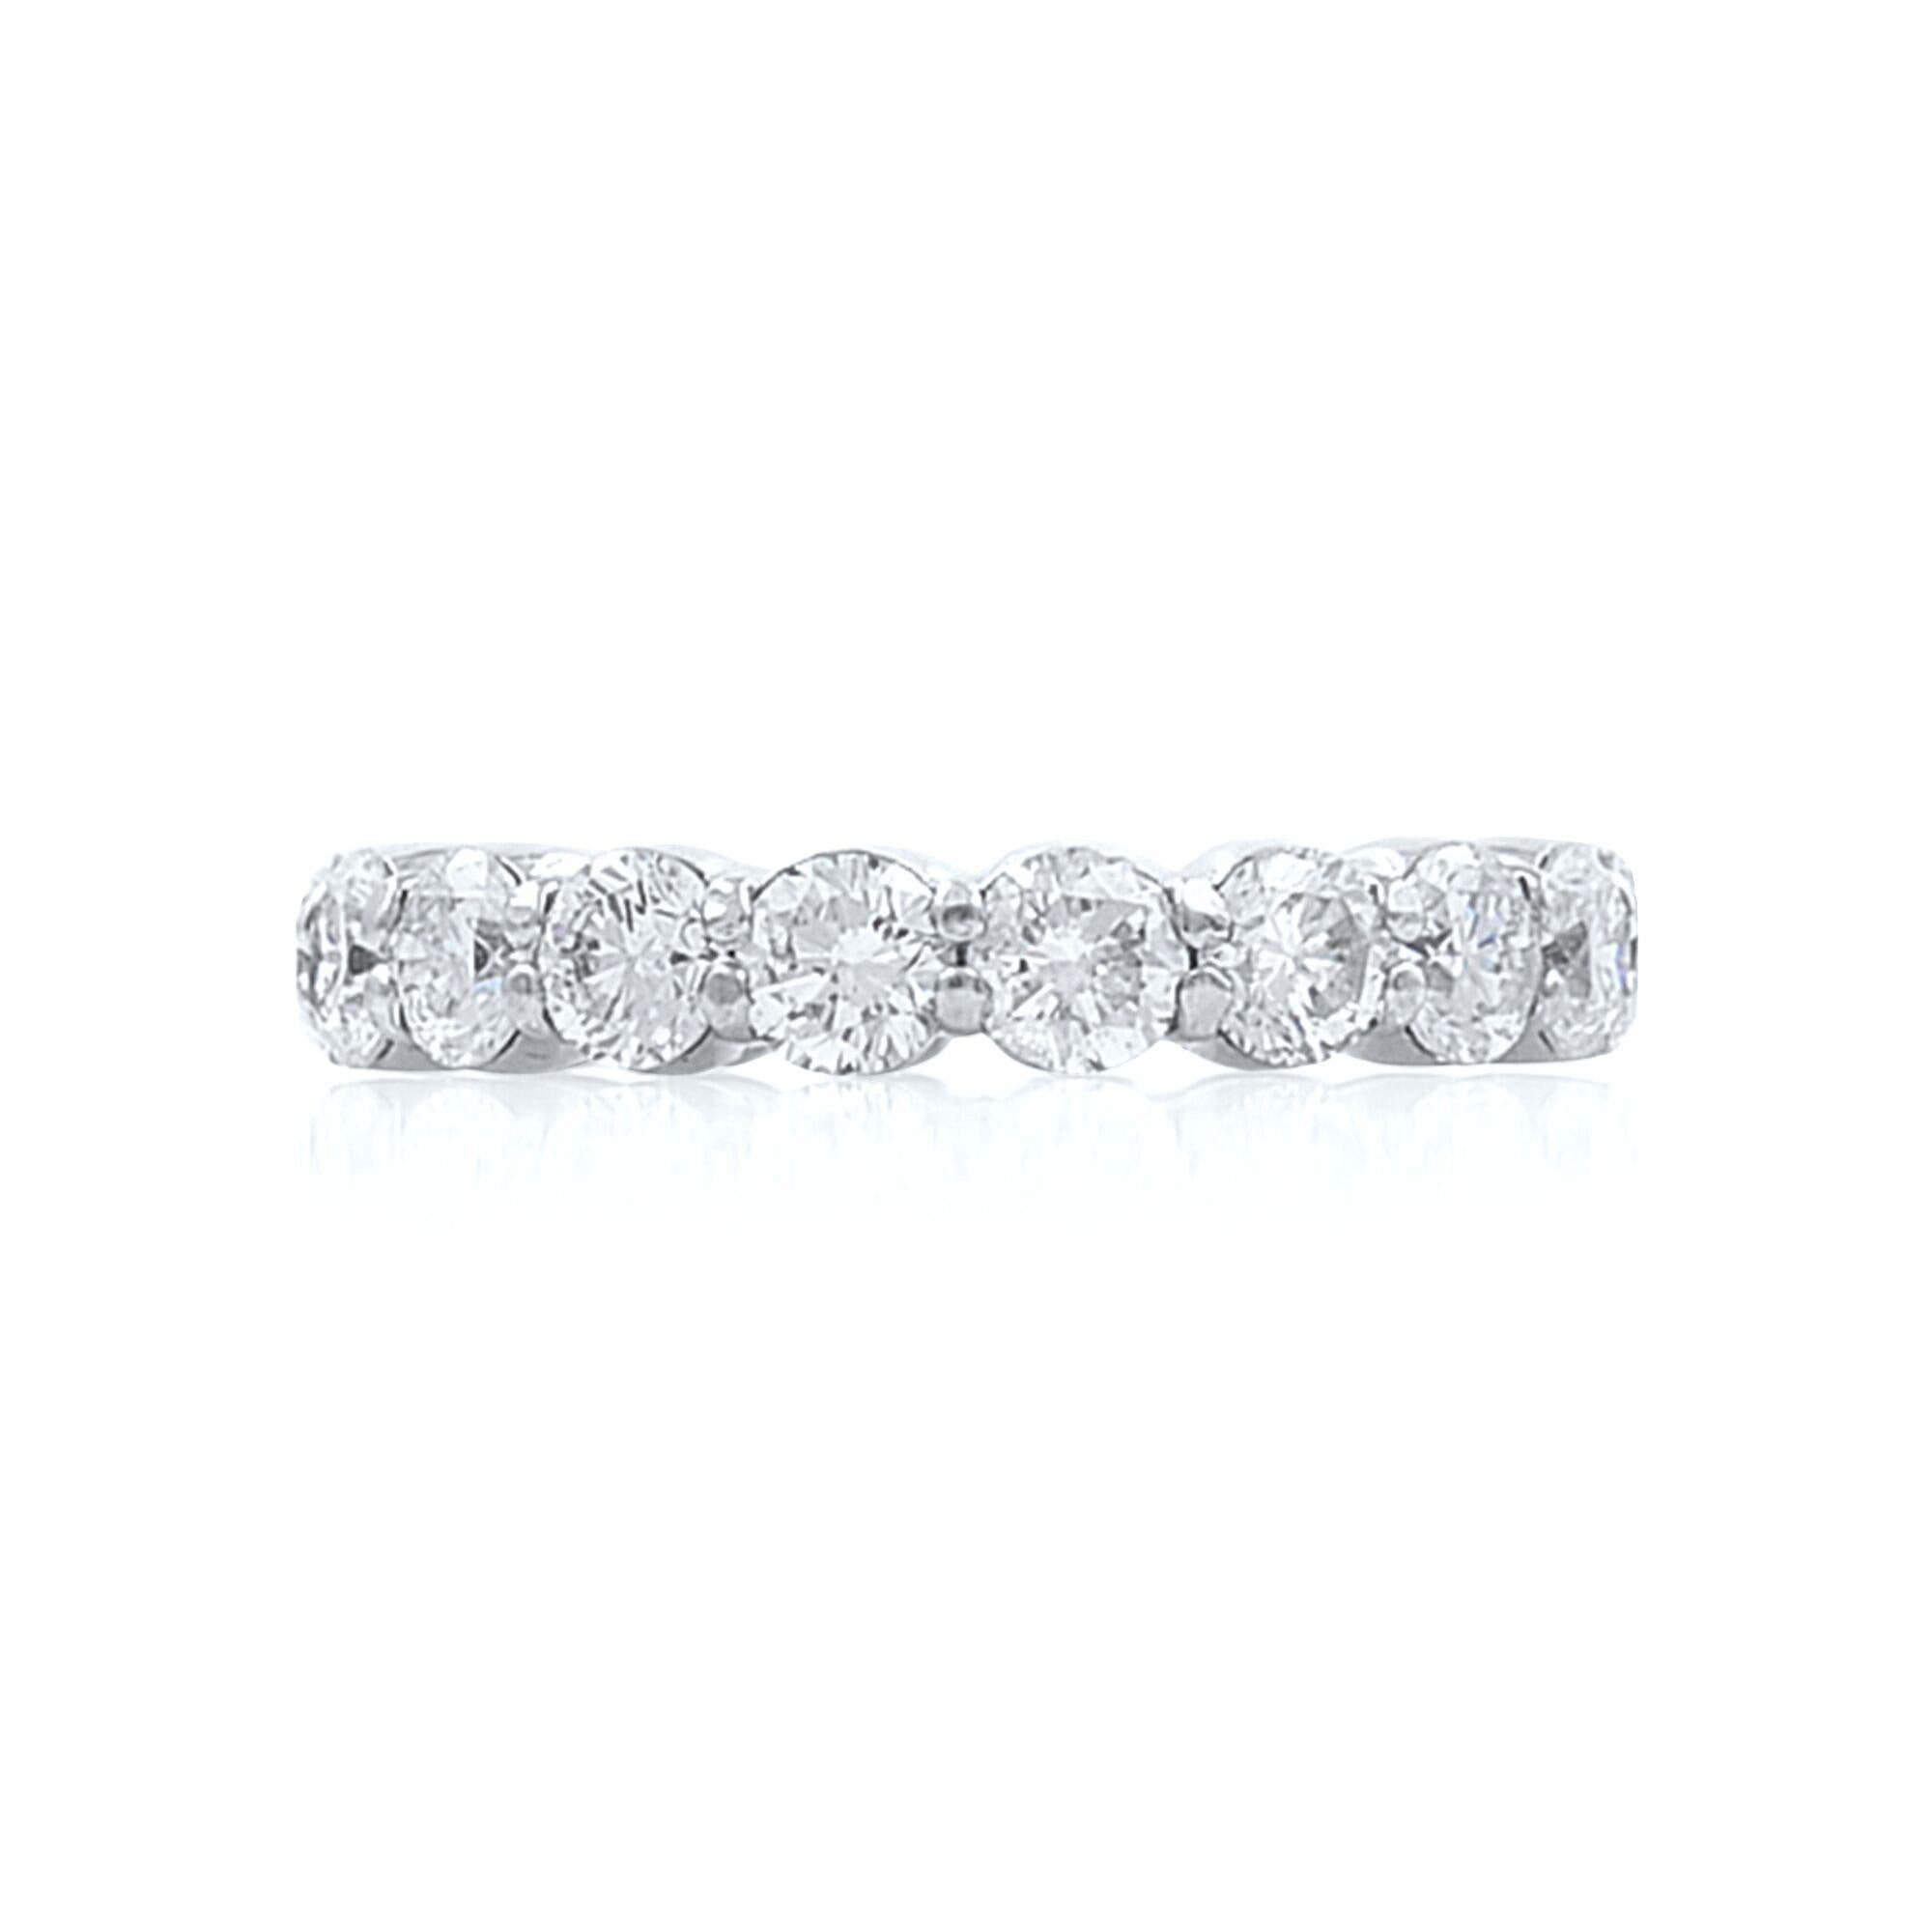 Rachel Koen Round Cut Diamond Eternity Band Ring Platinum 4.50cttw In New Condition For Sale In New York, NY